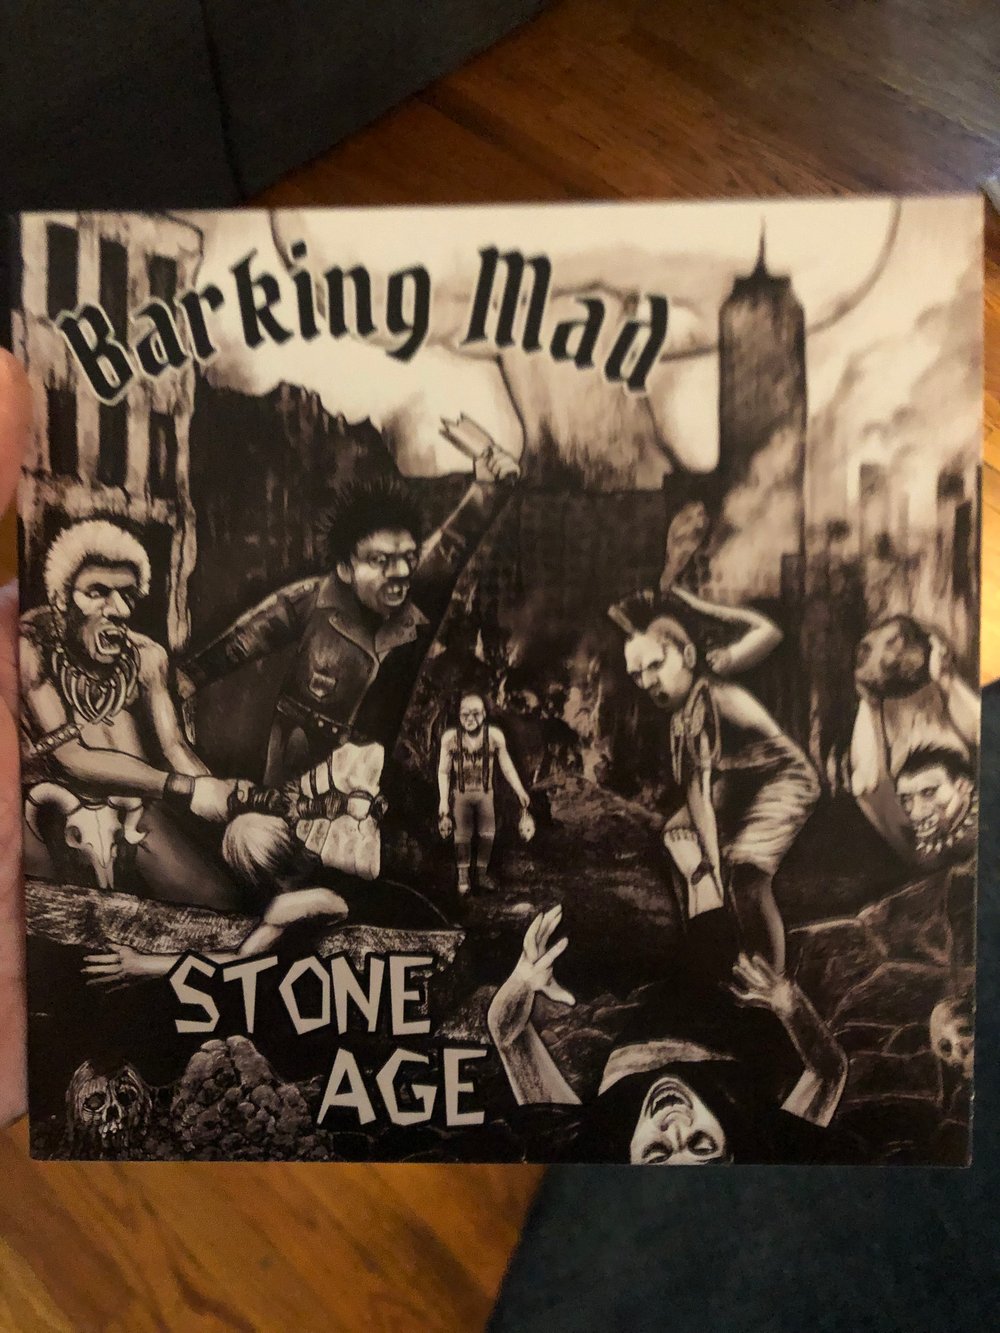 Barking Mad - Stone Age 7" (ALMOST GONE!!)